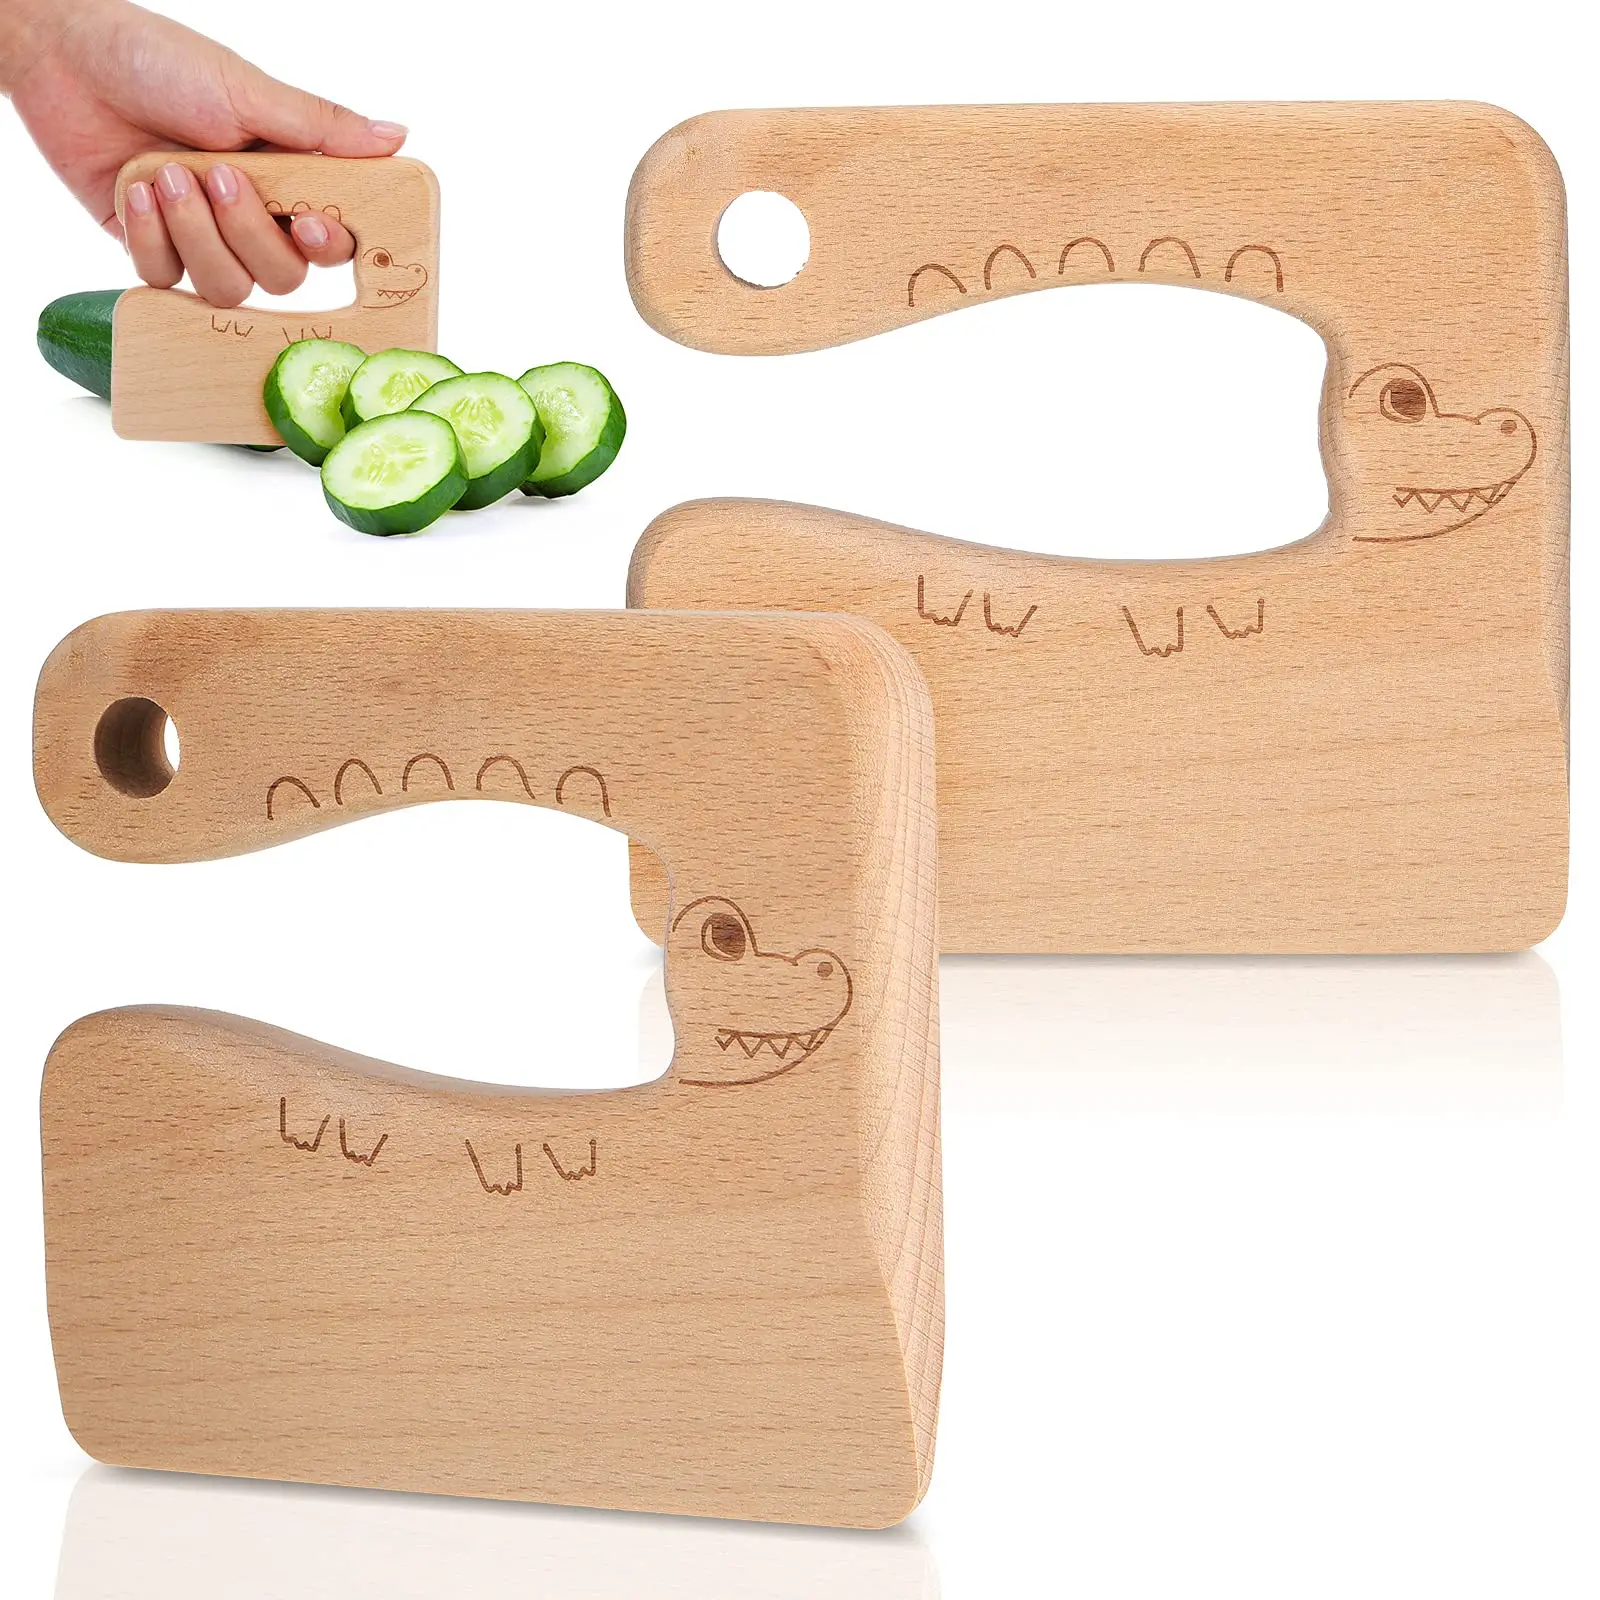 https://ae01.alicdn.com/kf/Sa7b7d9dadcc842a4929e8986868e2372E/Montessori-Education-Tools-For-Toddlers-Fruit-Vegetable-Chopper-Simulation-Knives-Cutting-Wooden-Kids-Knife-Cooking-Toys.jpg